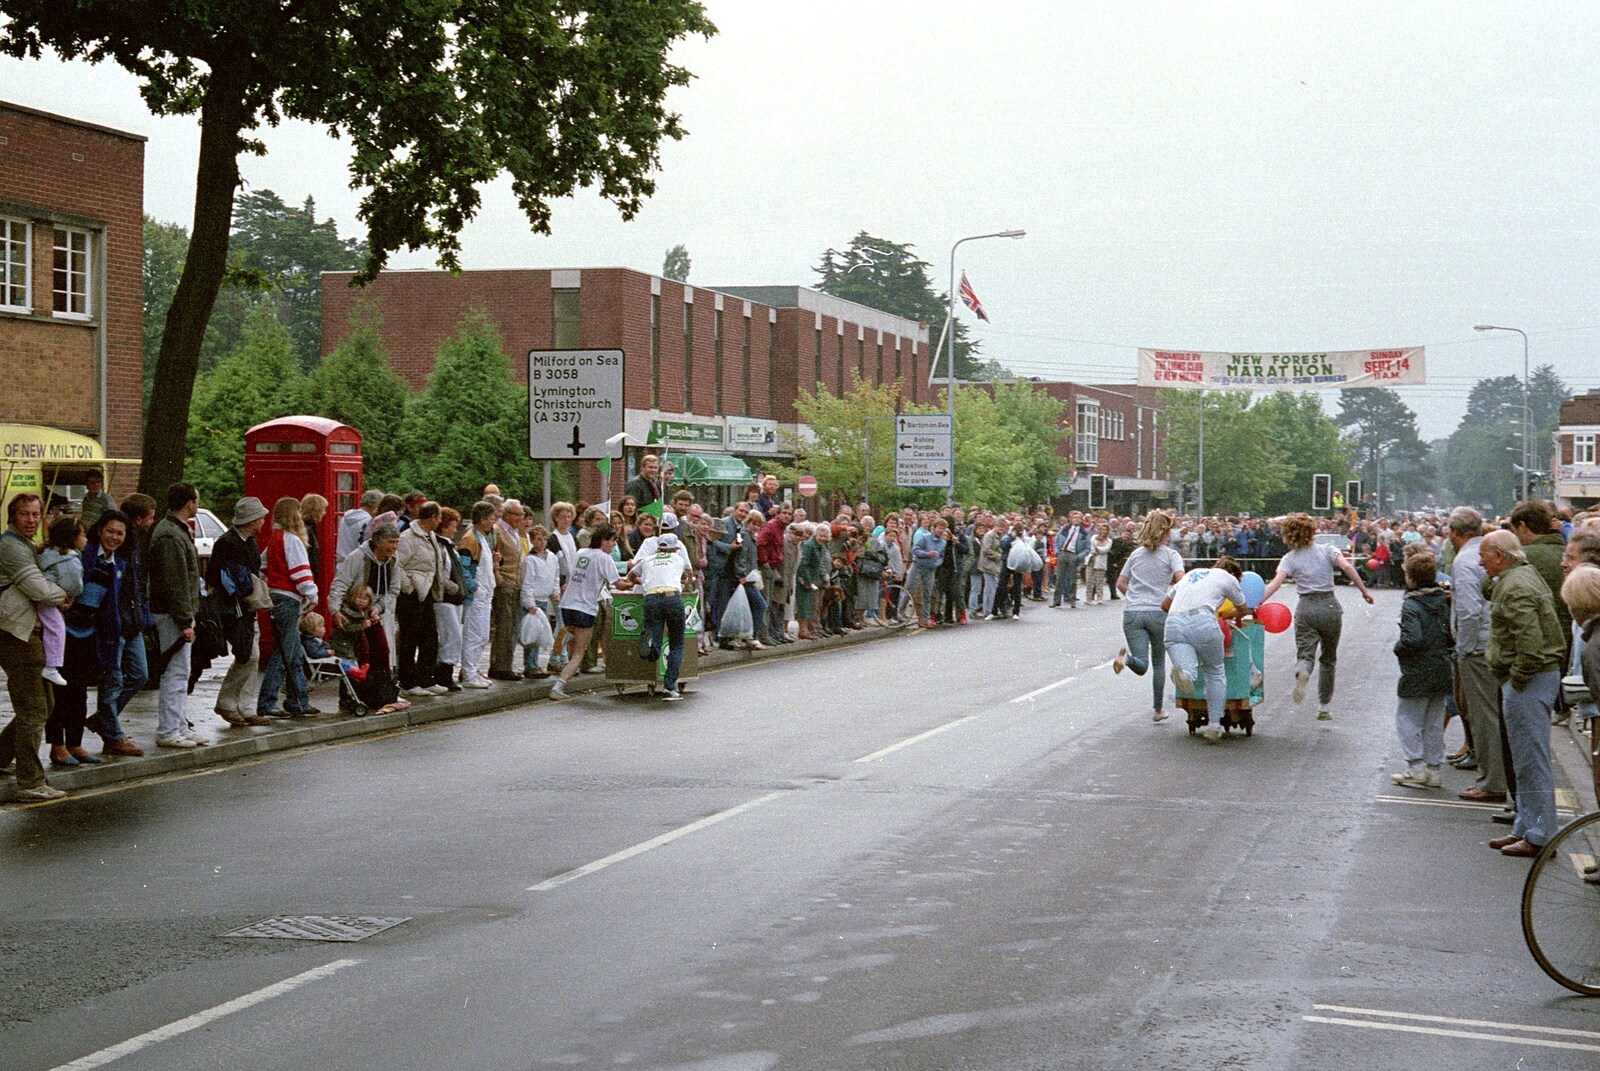 Heading for the finishing line from The New Forest Marathon, New Milton, Hampshire - 14th September 1986